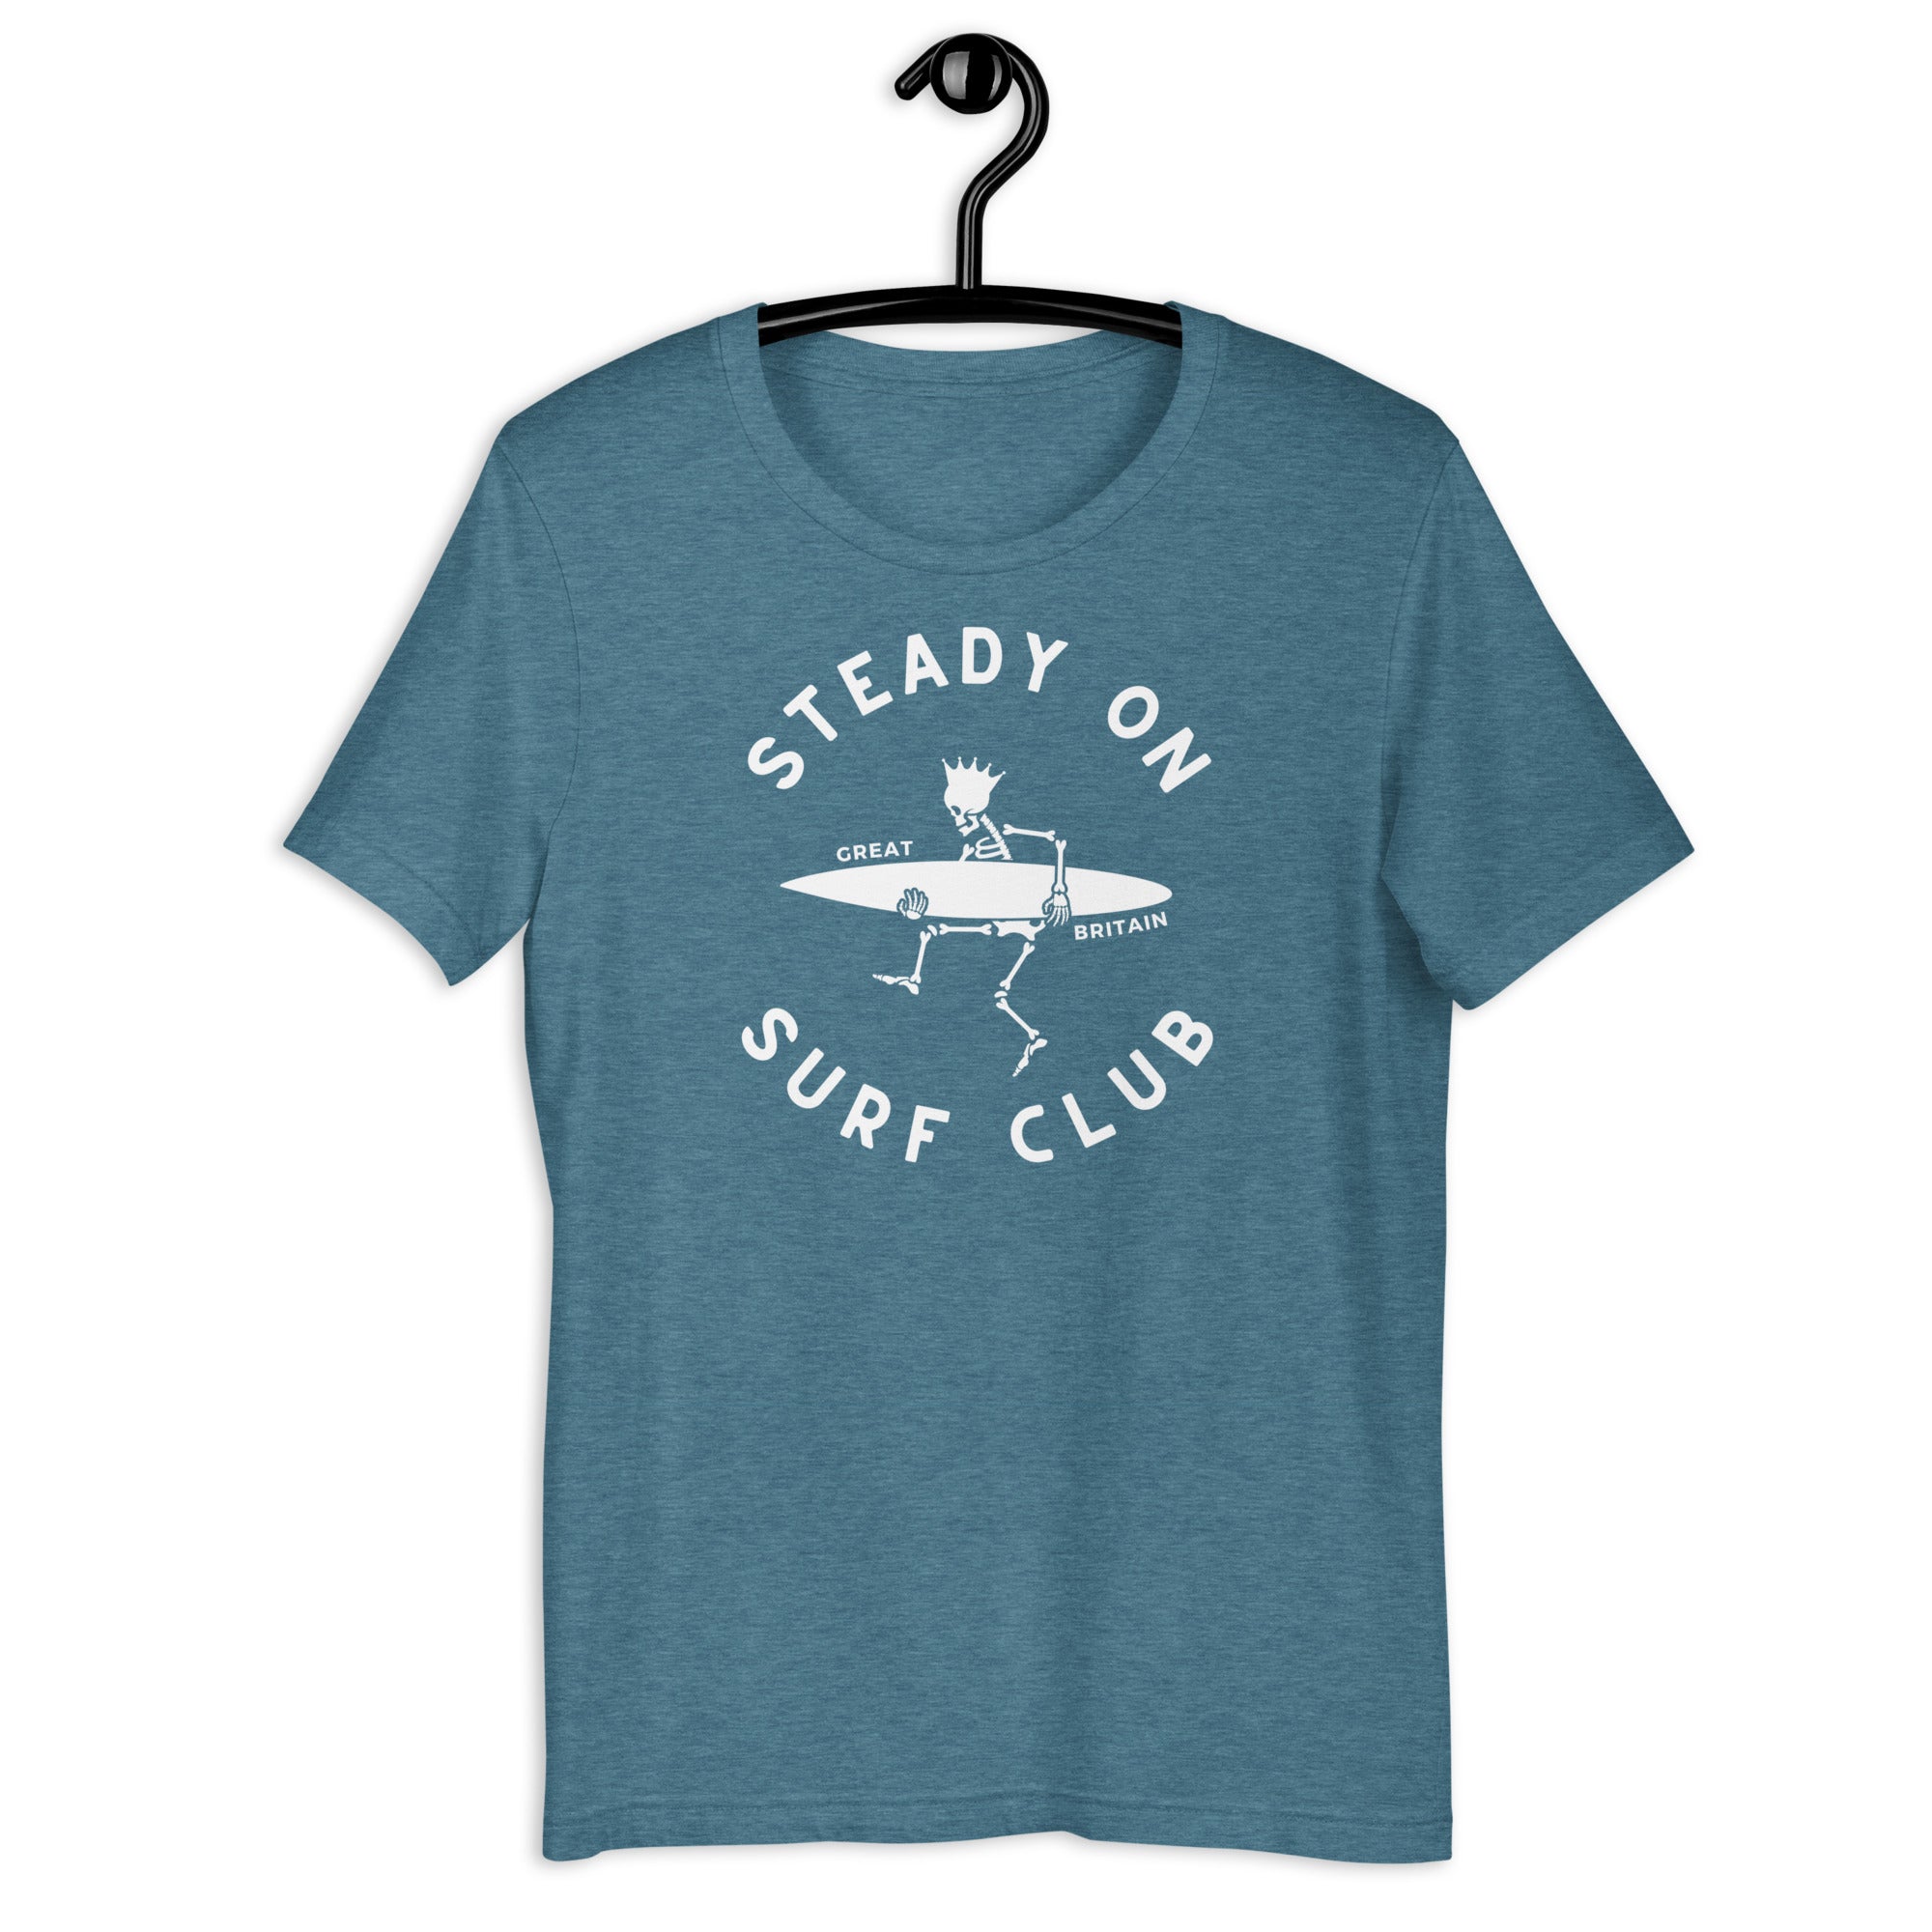 Steady On Surf Club Great Britain | Skeleton Surf King T-shirt